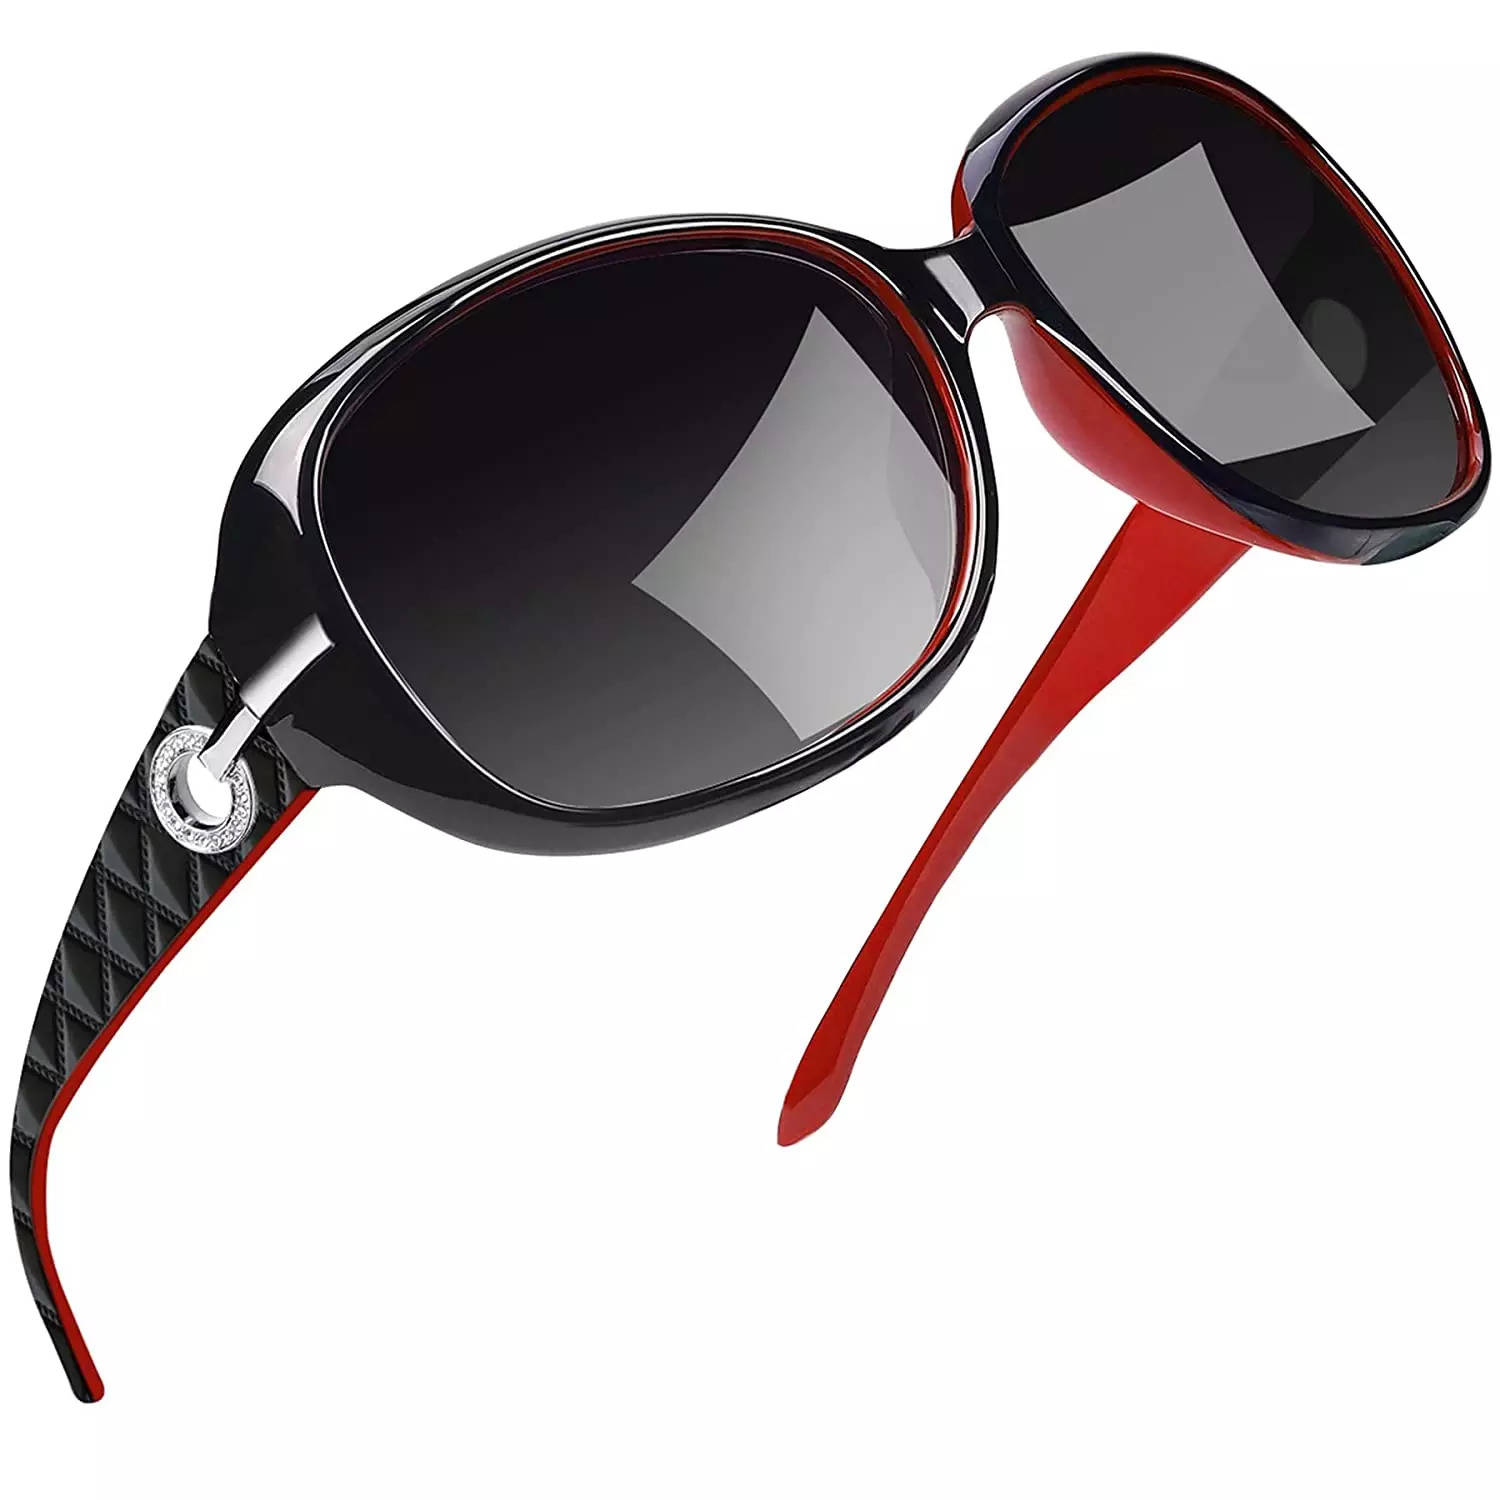 Womens Sunglasses: Buy Womens Sunglasses online at best prices in India 